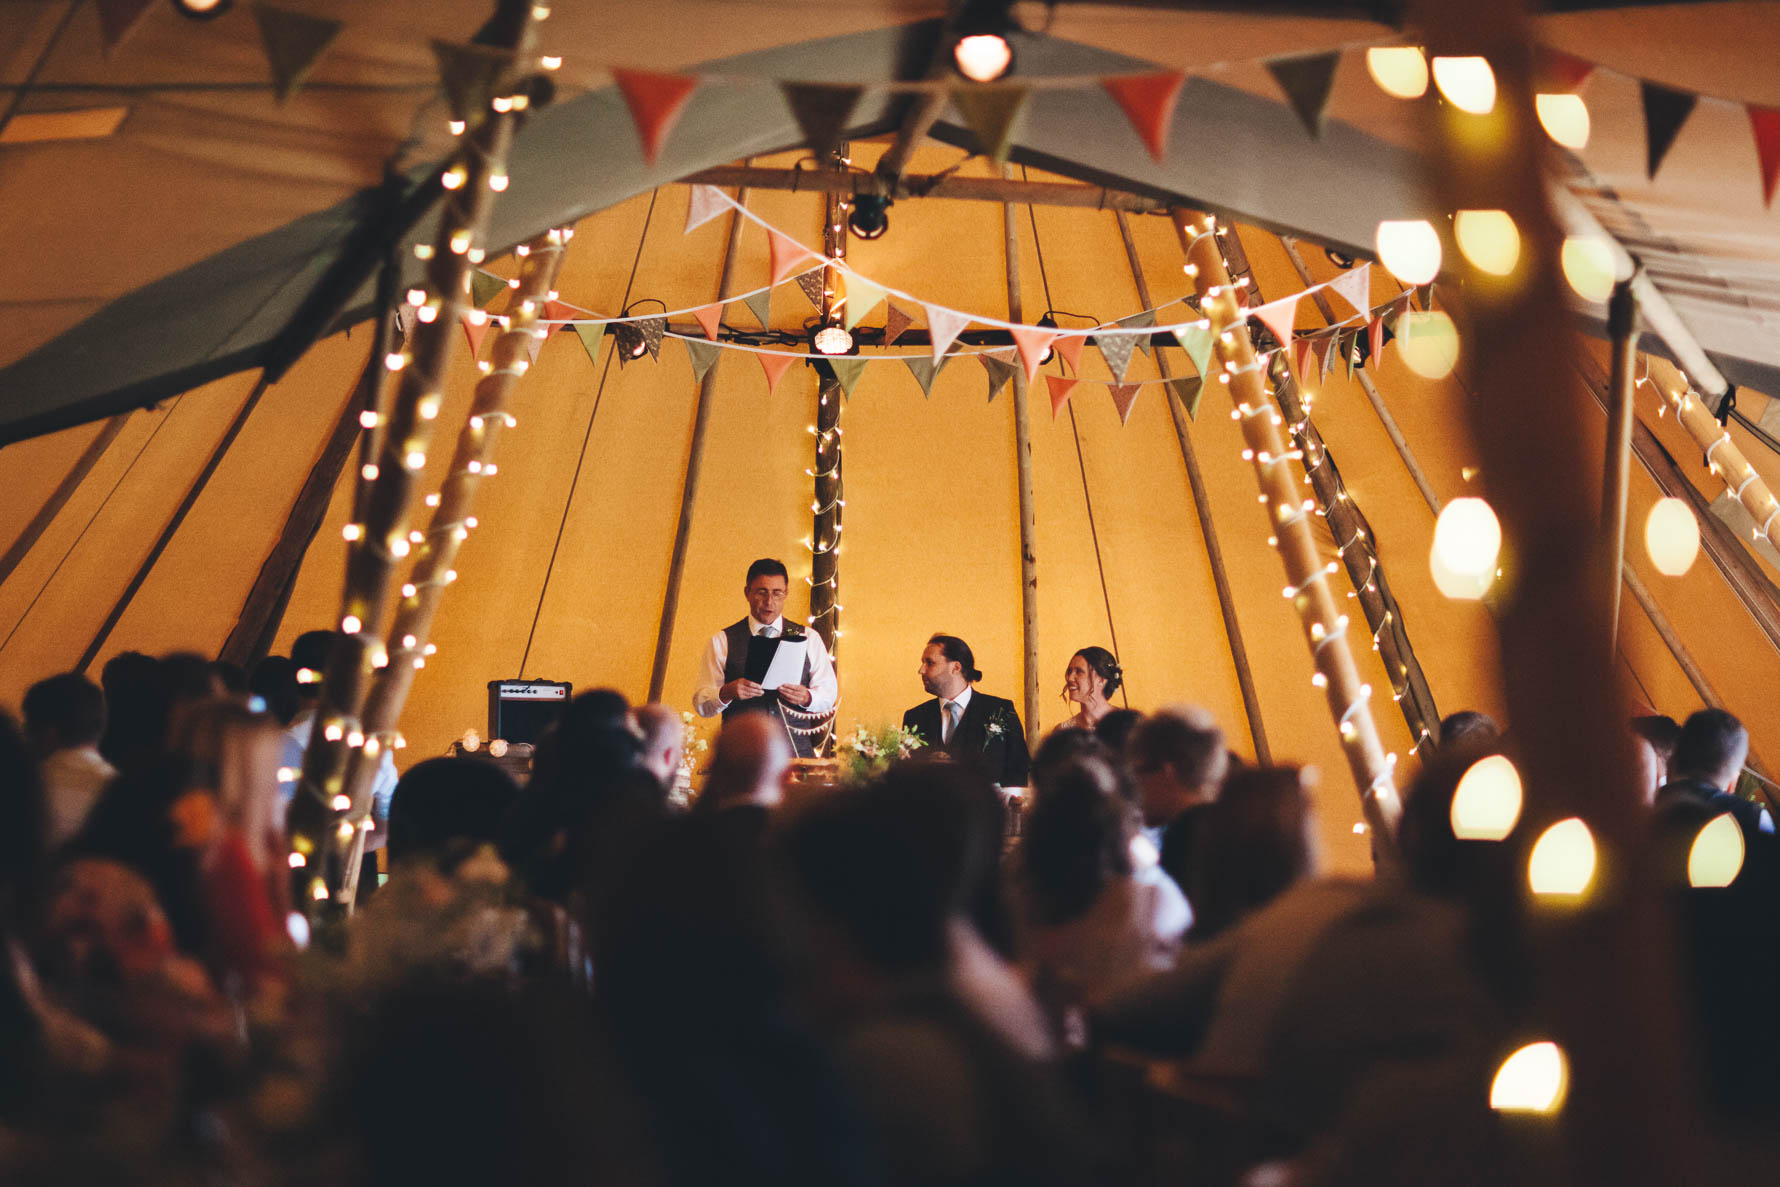 Best man stood reading a speech inside a tipi with bunting and fairy lights around the supports of the tipi